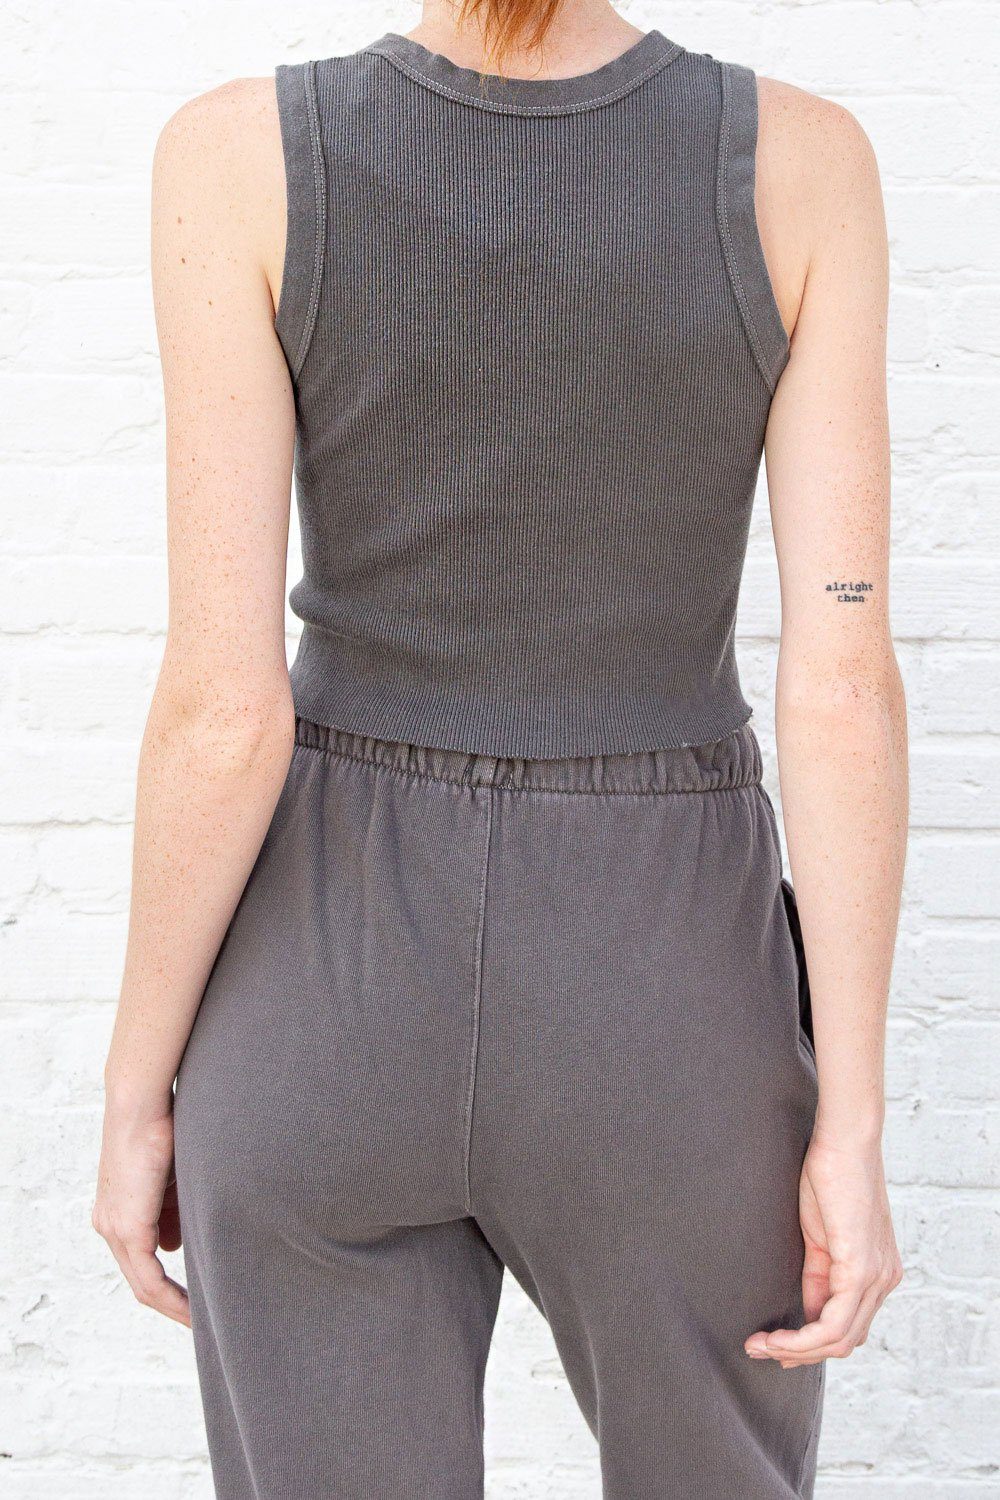 Brandy Melville Connor Tank Gray - $8 (50% Off Retail) - From Grace